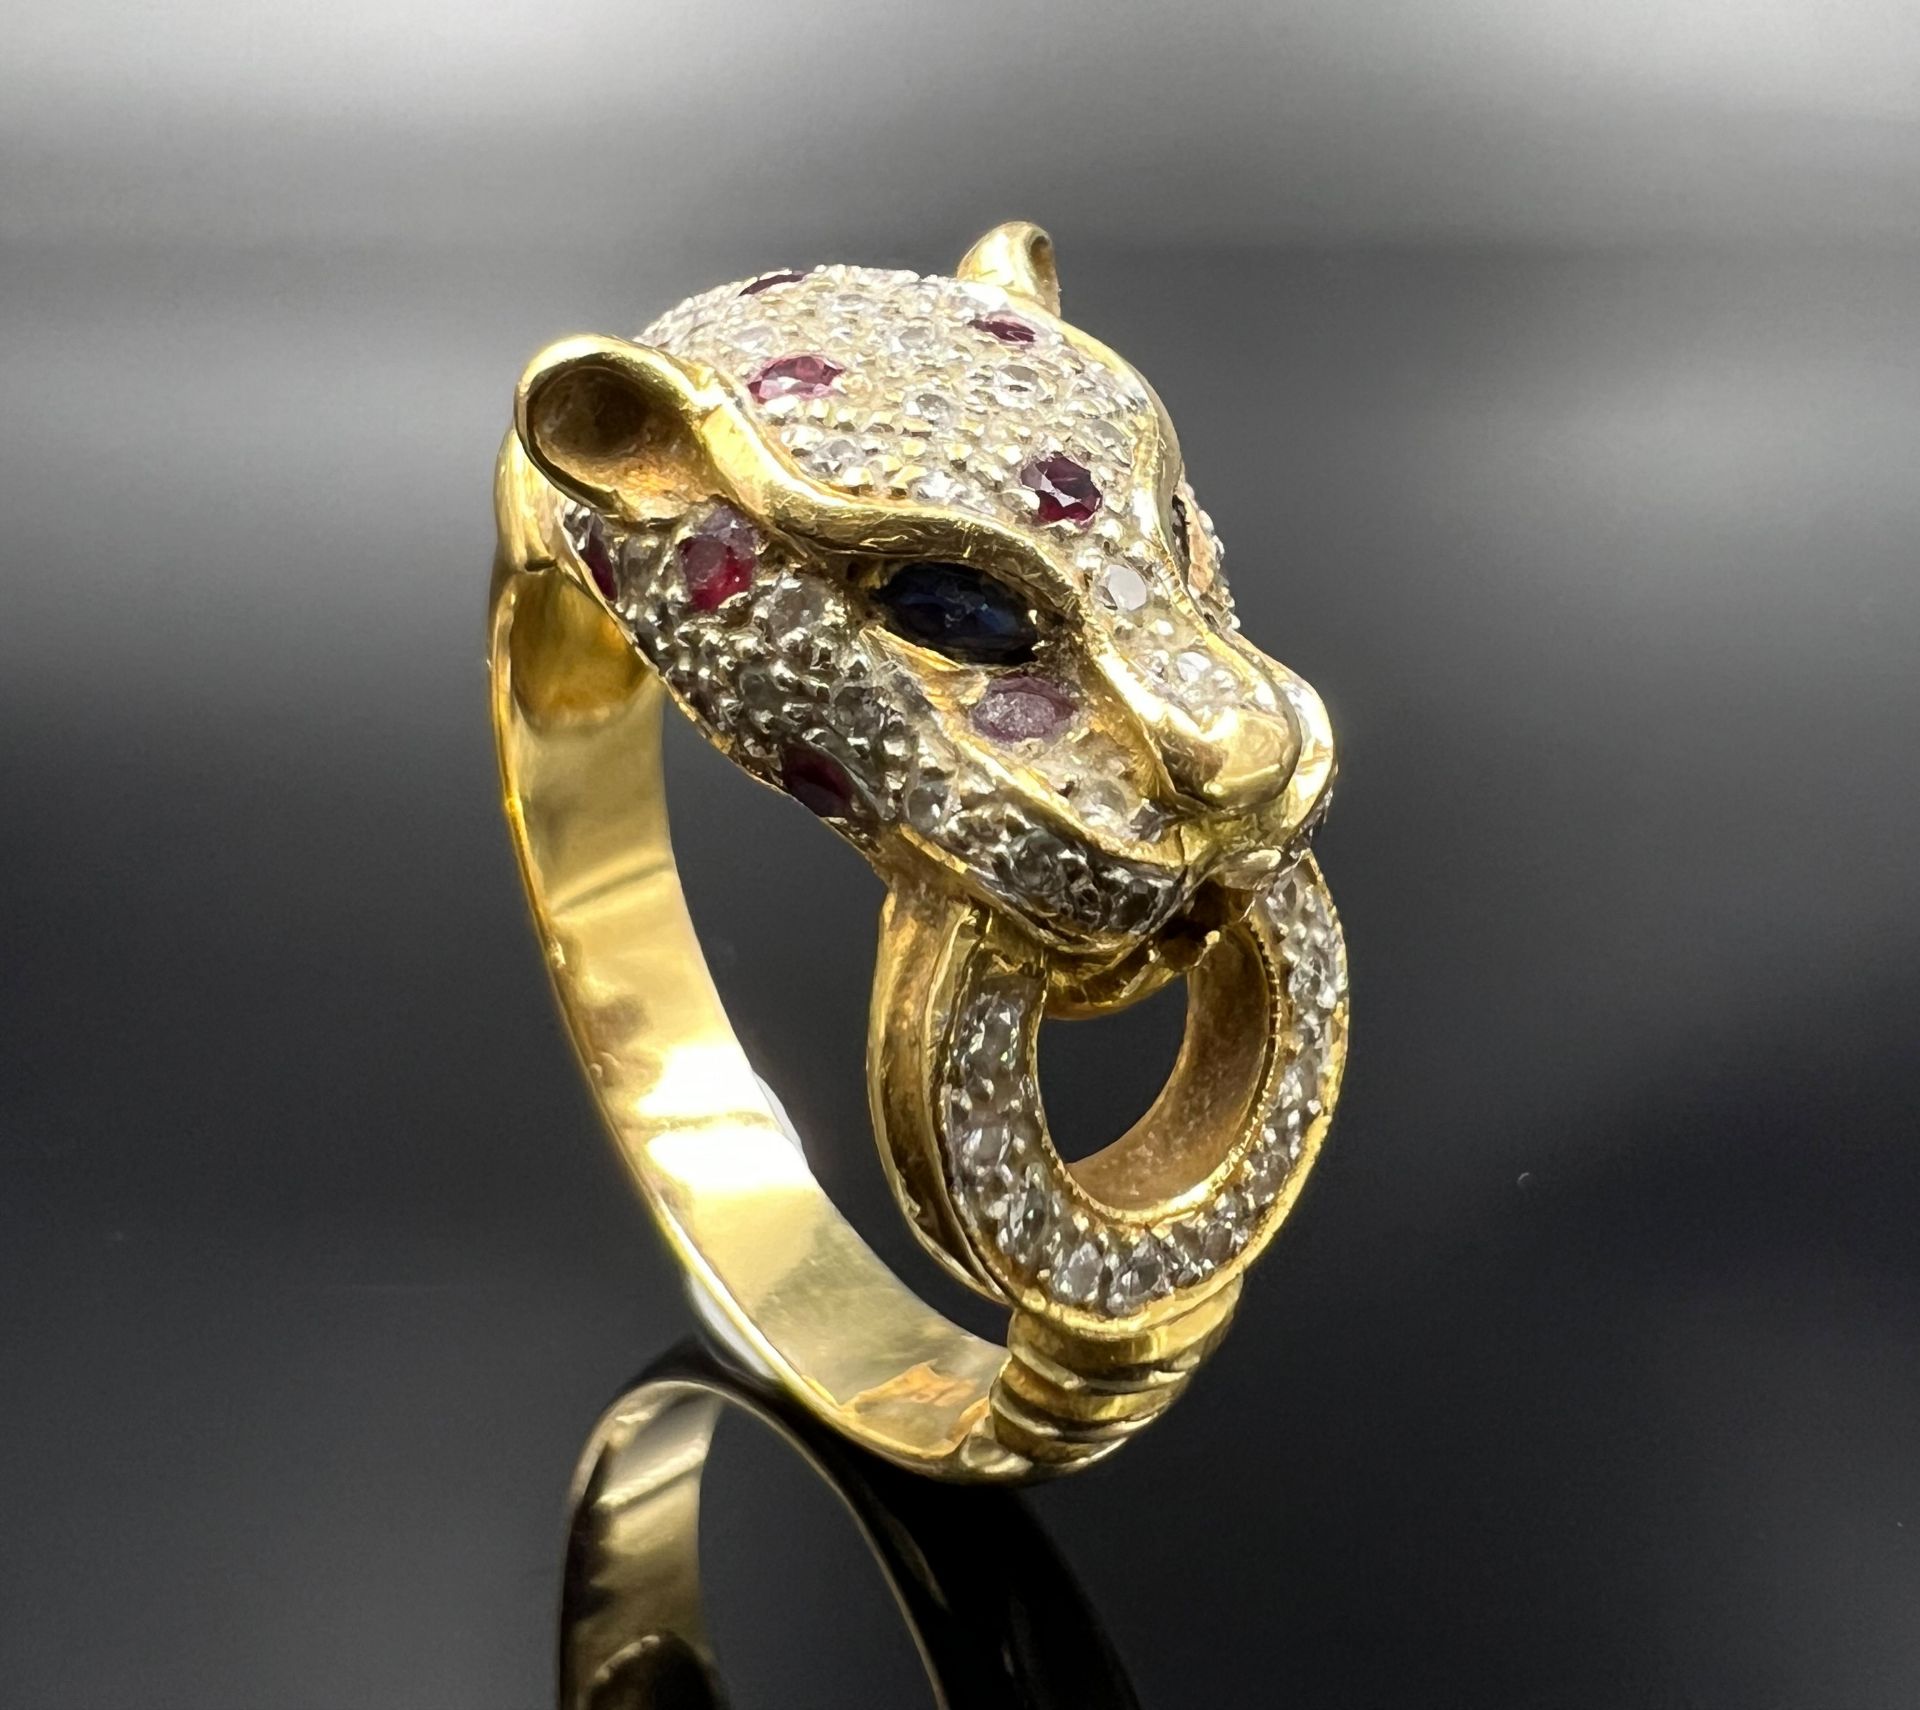 Ladies' ring "Cheetah". 750 yellow gold and white gold with gemstone setting. - Image 3 of 7